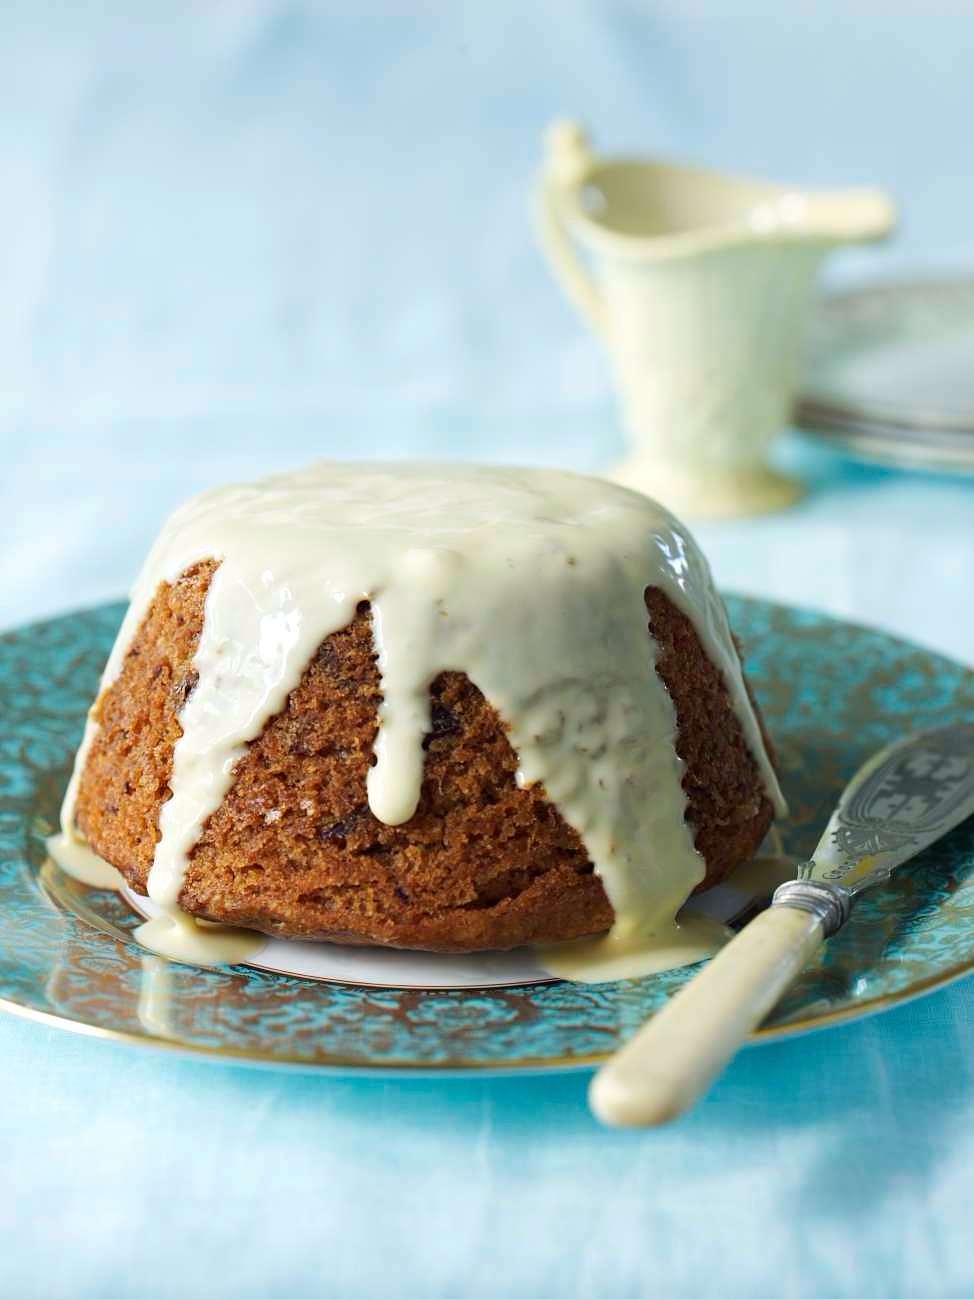 Steamed Date Pudding